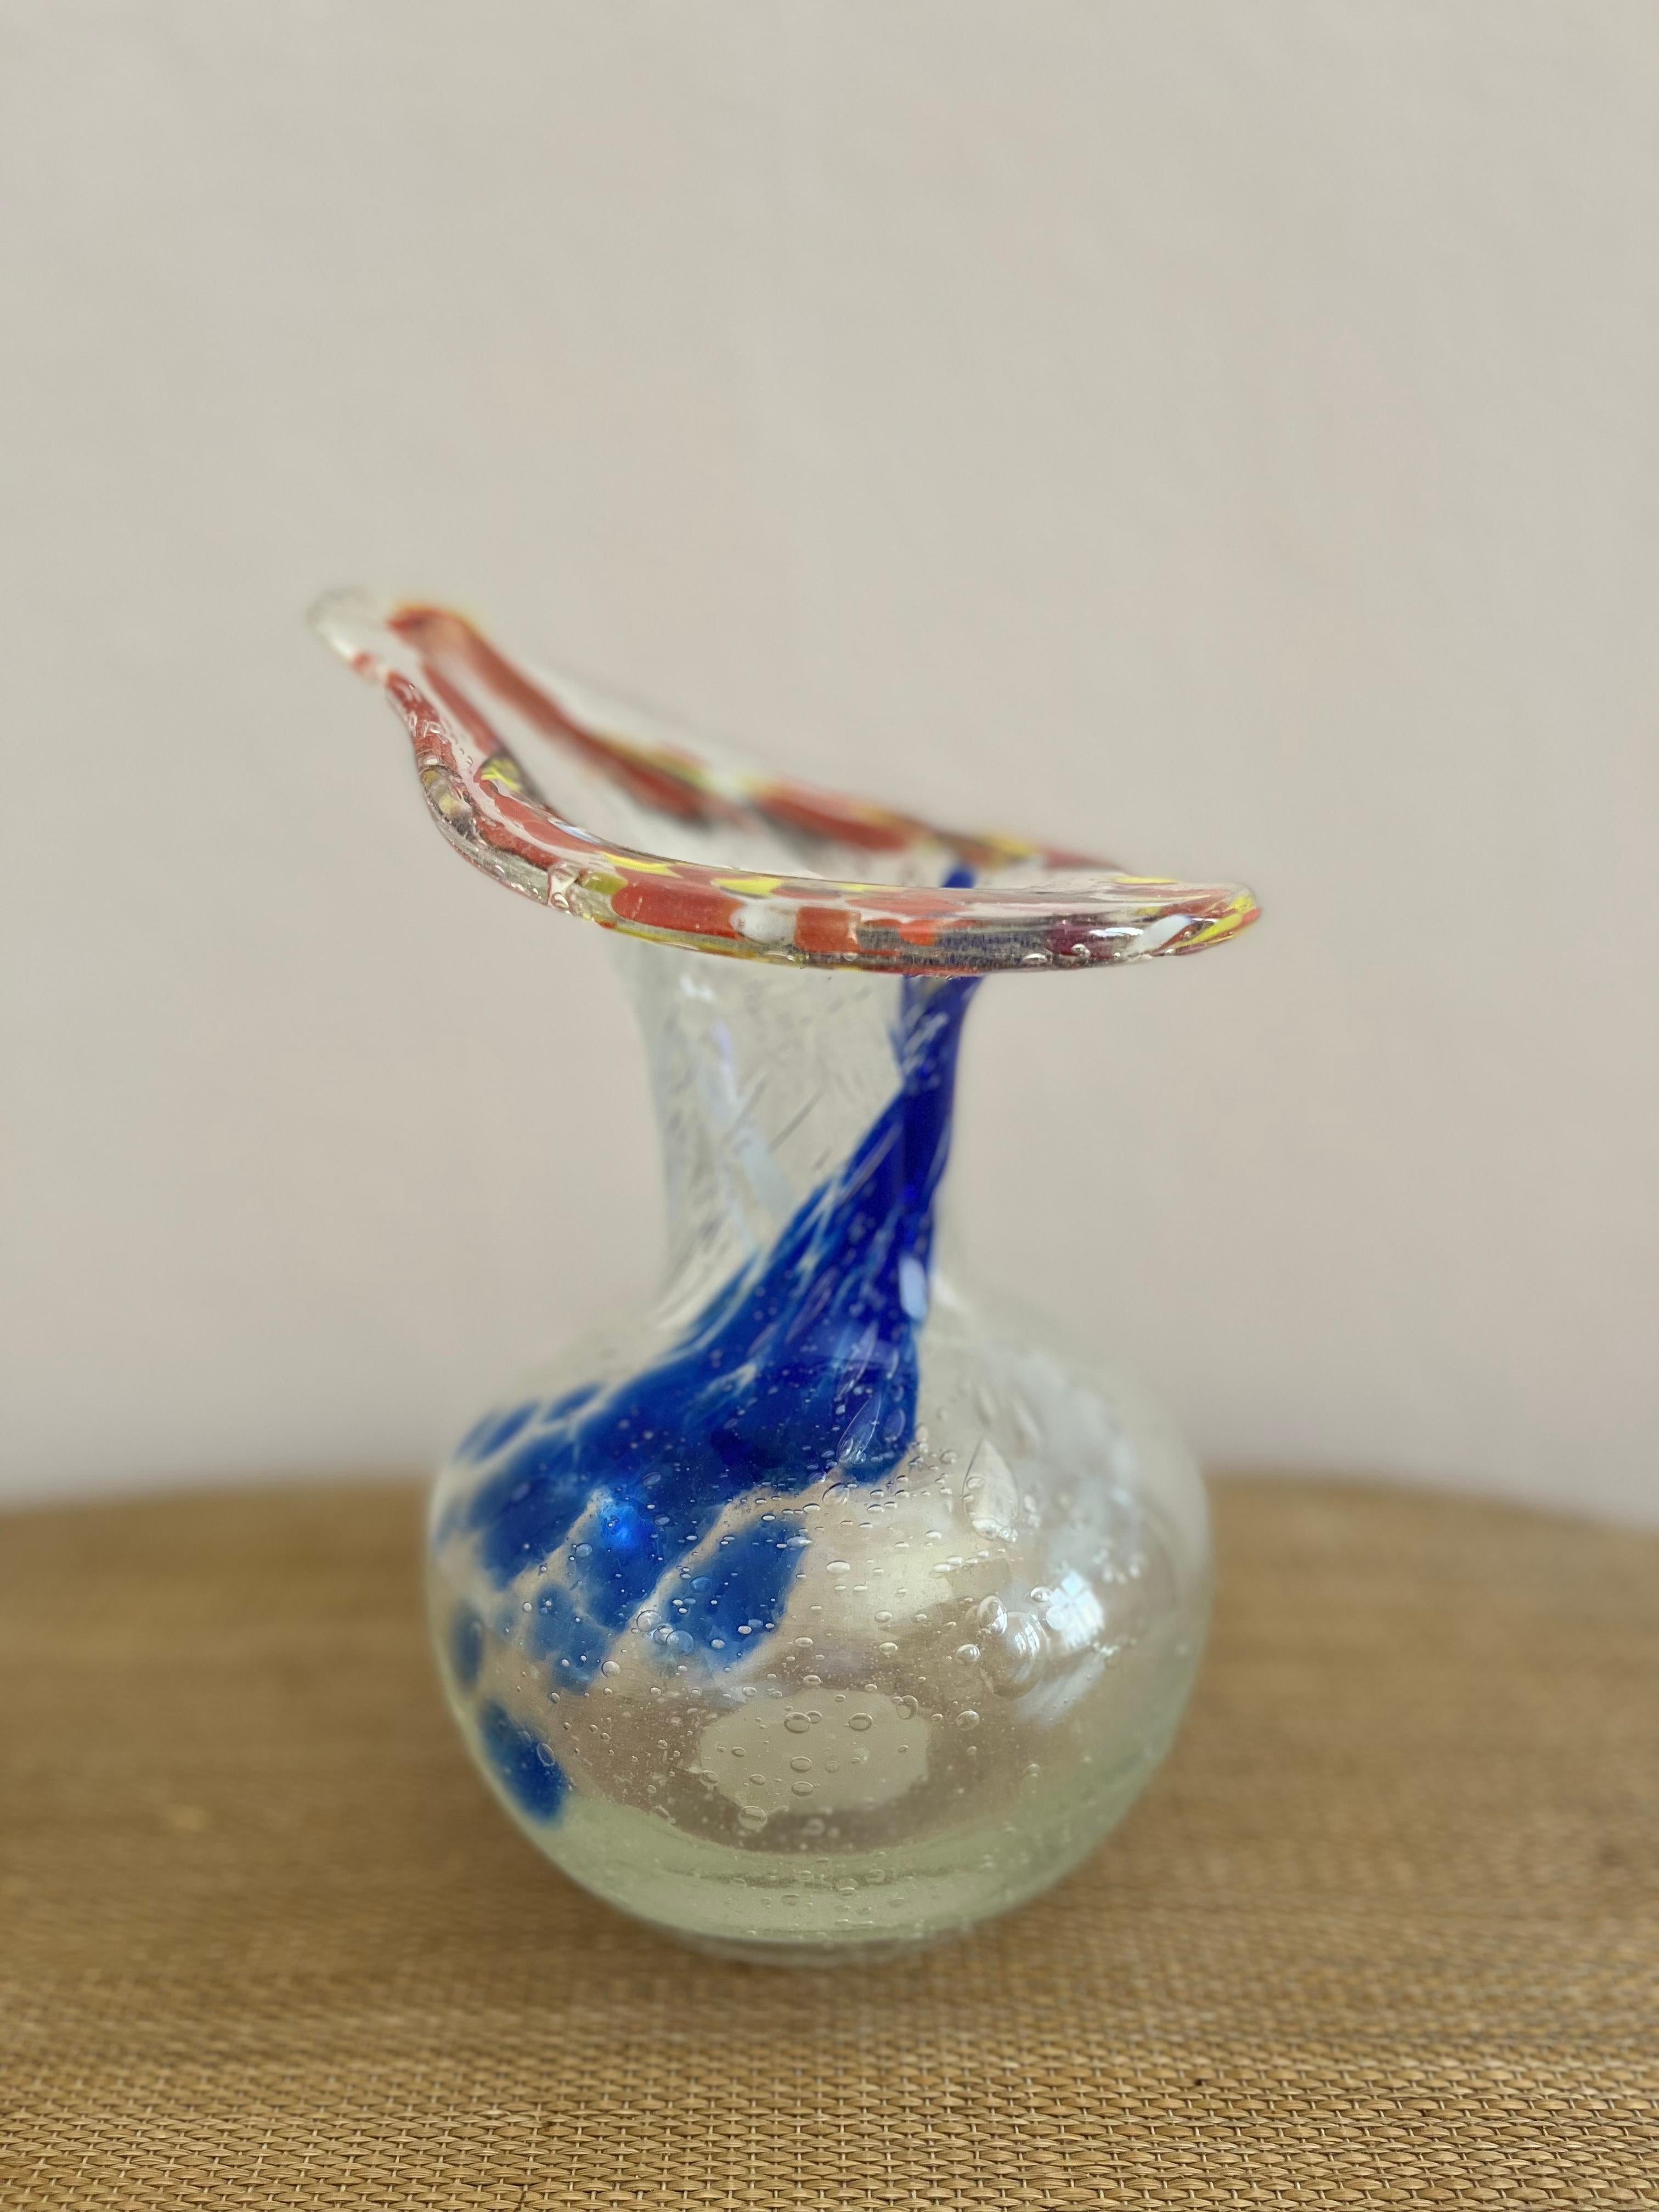 Swedish glass art vase in organic shapes.

Handmade Swedish glass art vase in clear, blue, orange, yellow and red. Bubbles in the glass, art glass piece.

Height: 20 cm (7.9 in). 